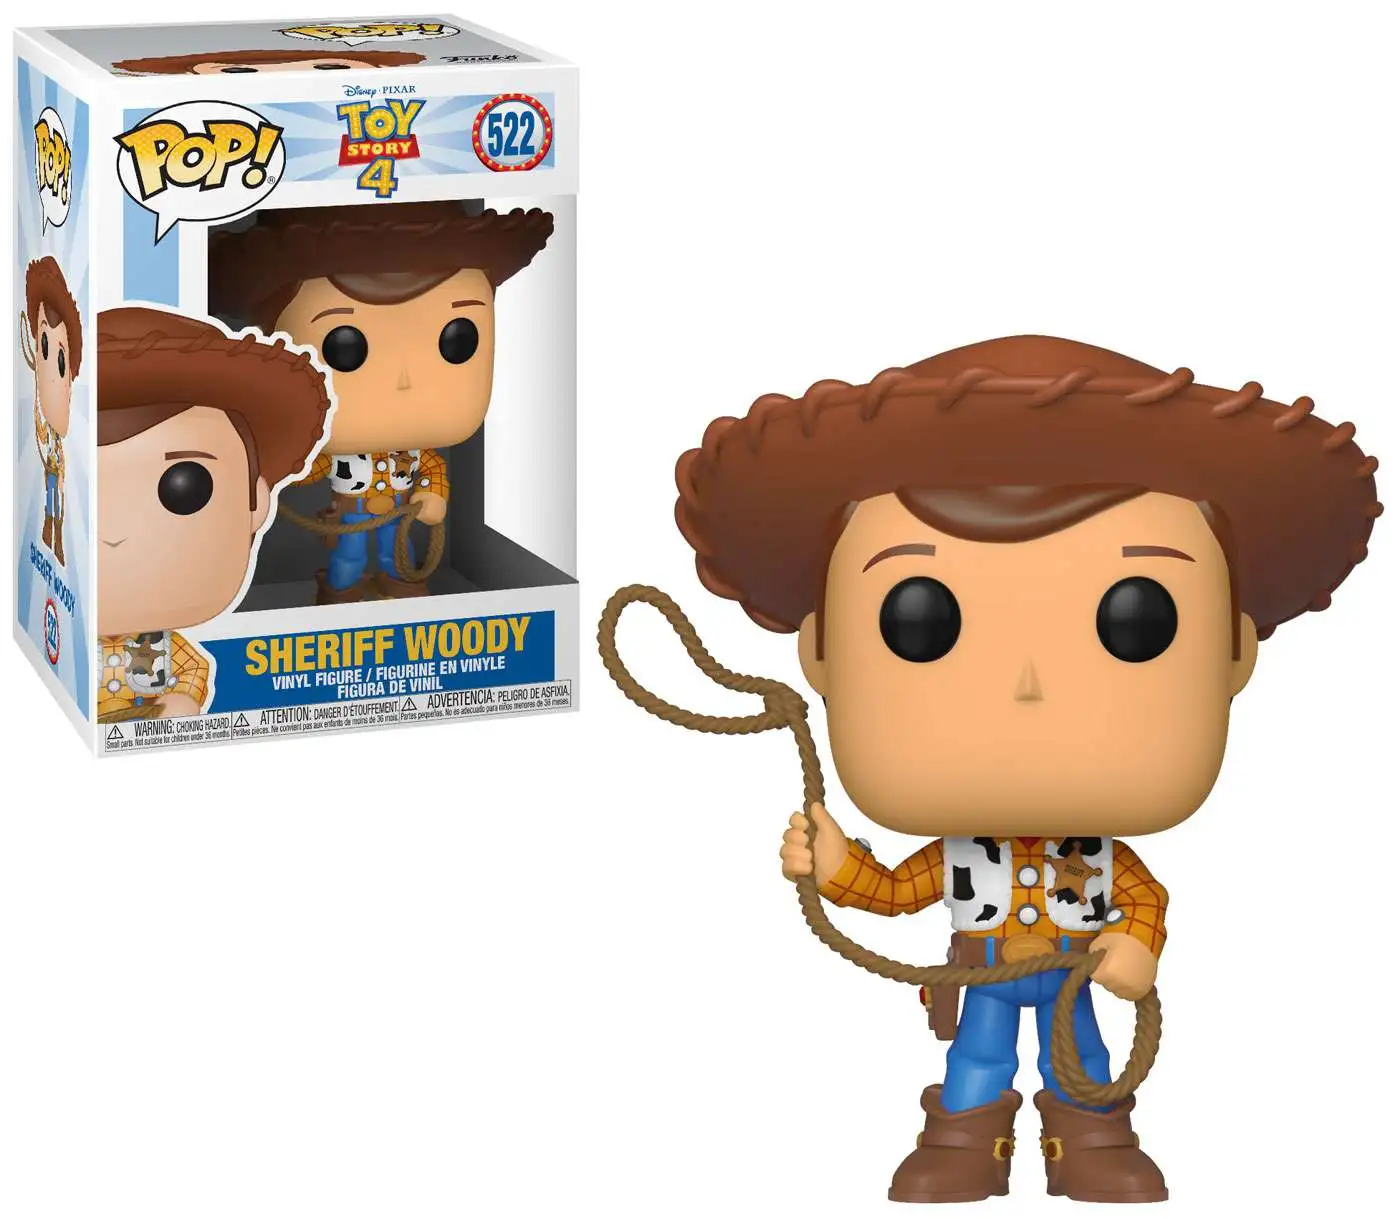 Woody #168 PVC POP Figure Details about   Disney Pixar Animation Toy Story 20th Anniversary 